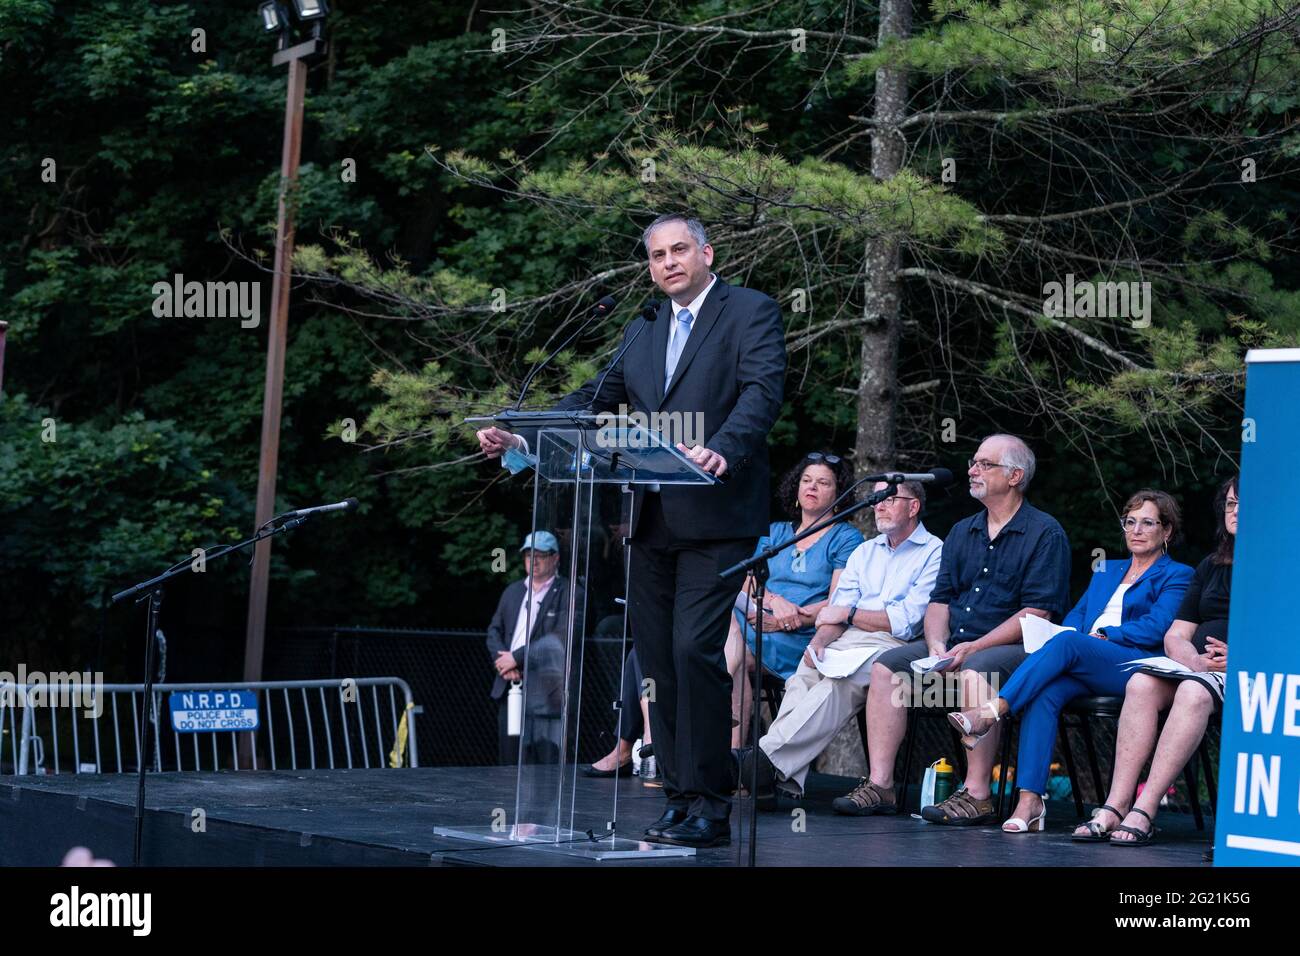 Scarsdale, NY - June 7, 2021: Acting New York Israeli Consul General Israel Nitzan speaks at Westchester stands united against anti-semitism and hate rally at Jewish Community Center of Mid-Westchester Stock Photo